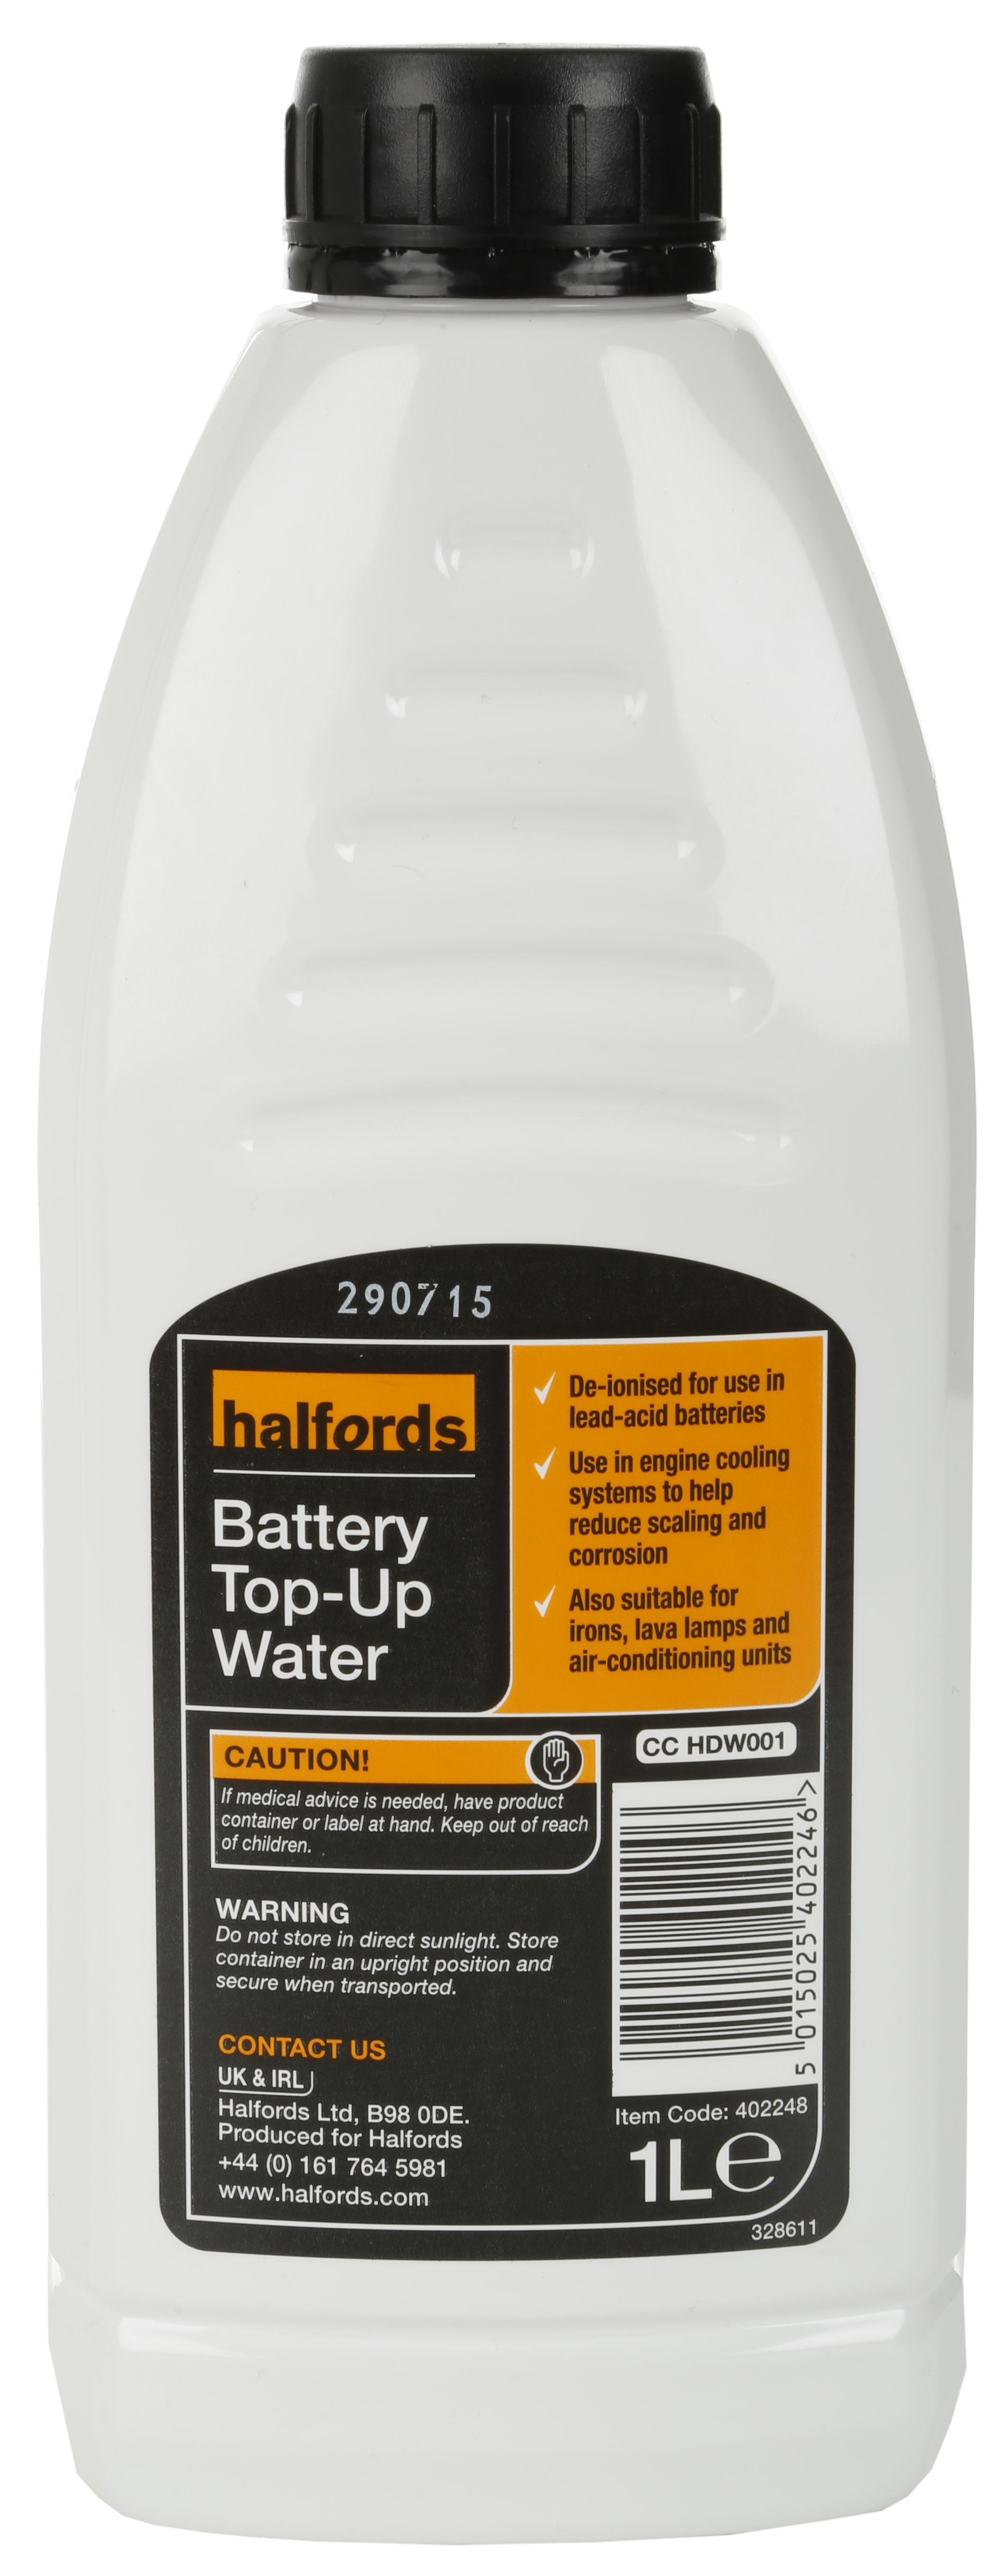 Halfords Battery Top-Up Water 1L